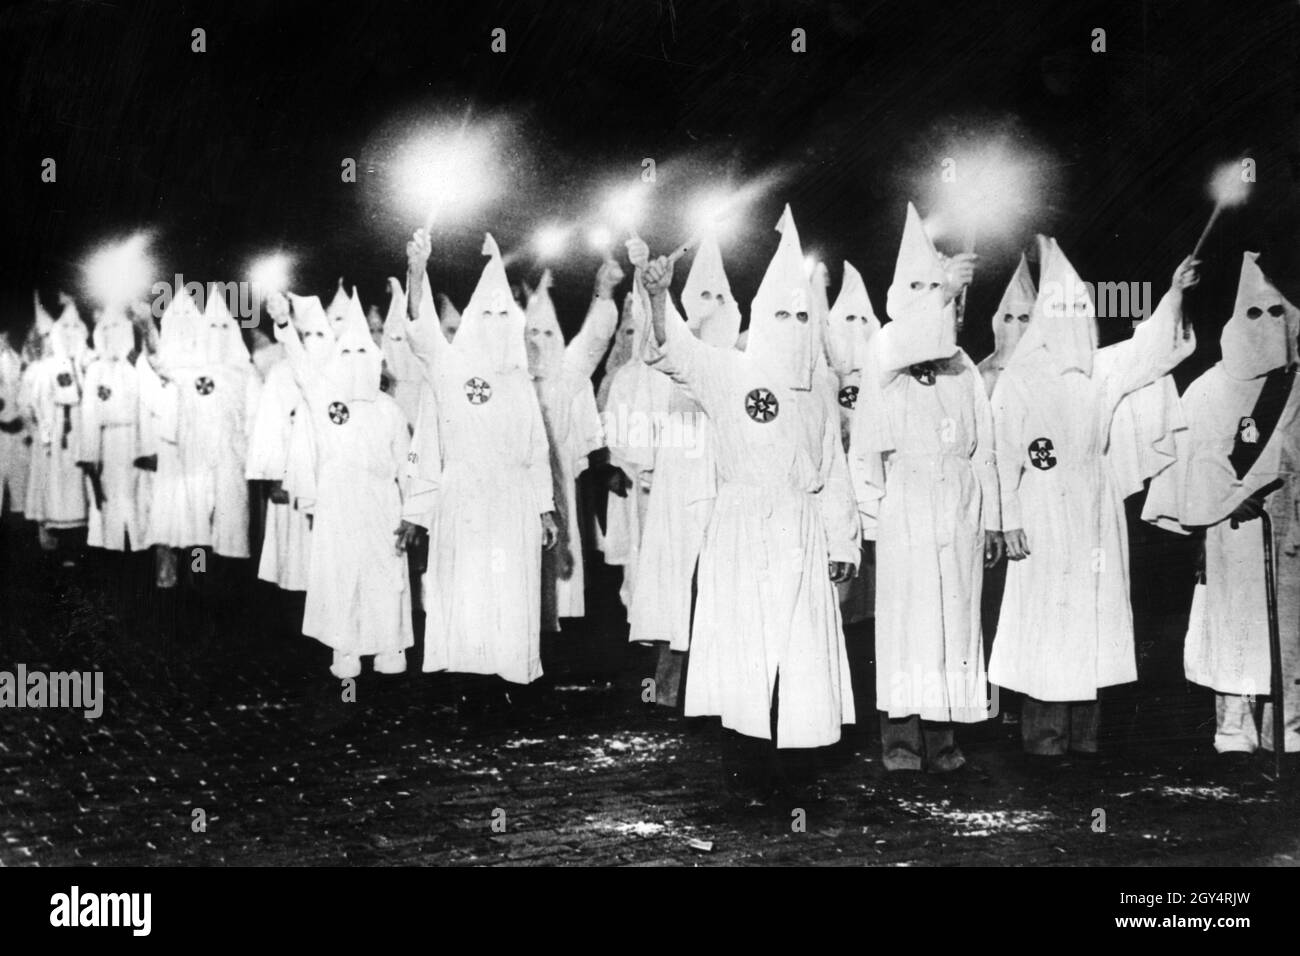 In an effort to intimidate African-American voters ahead of the next local election, members of the Ku Klux Klan are marching through St. Petersburg in the US state of Florida at night carrying torches. [automated translation] Stock Photo